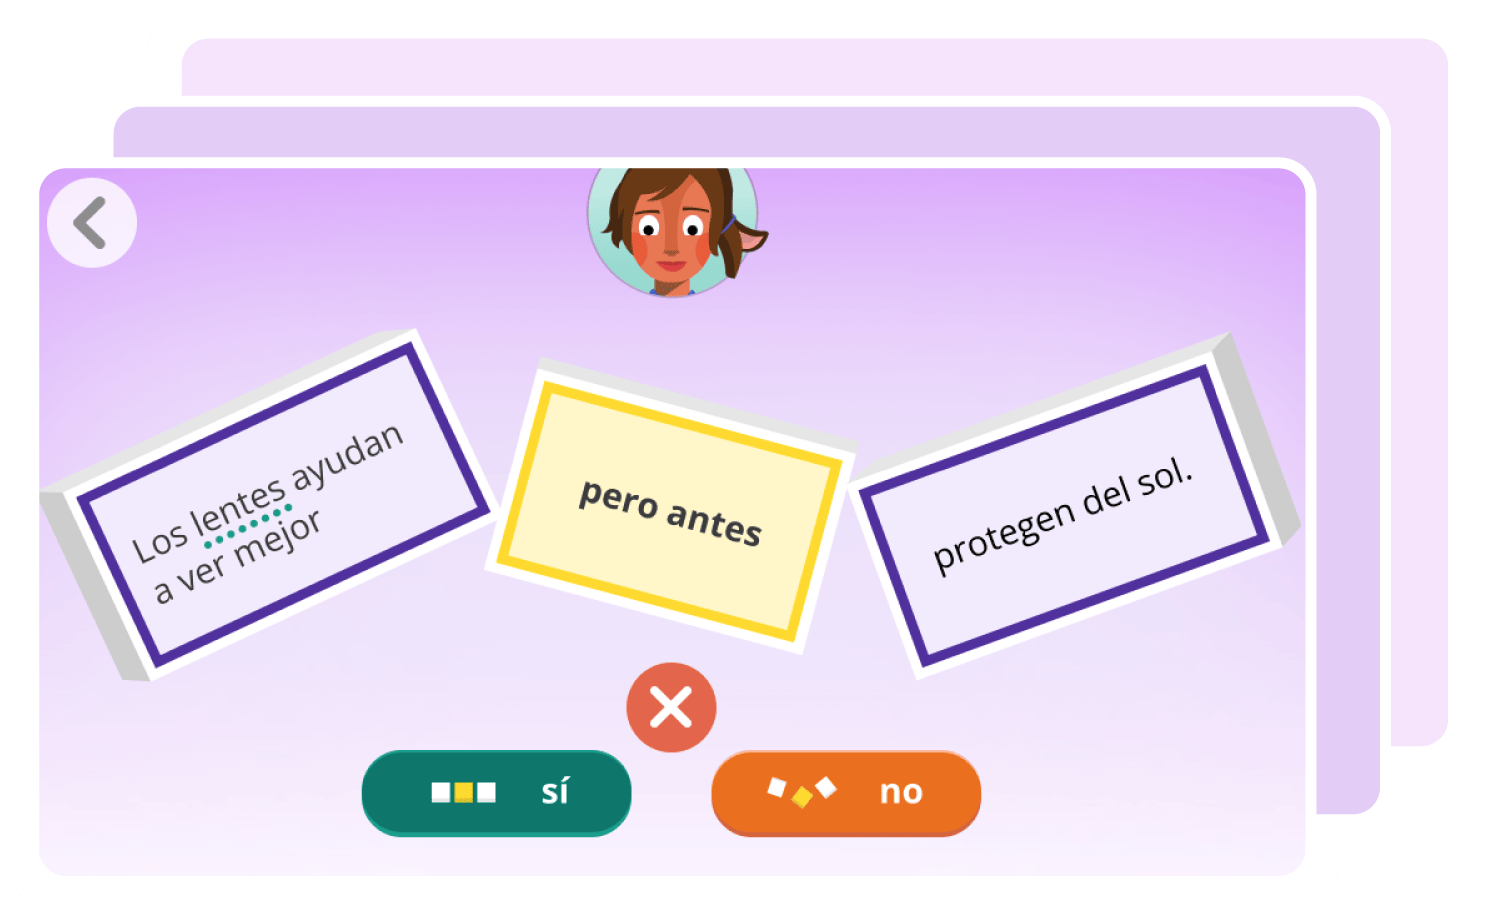 Digital educational flashcards for personalized Spanish literacy instruction, featuring a phrase about glasses helping to see better and protecting from the sun, with interactive yes/no buttons.